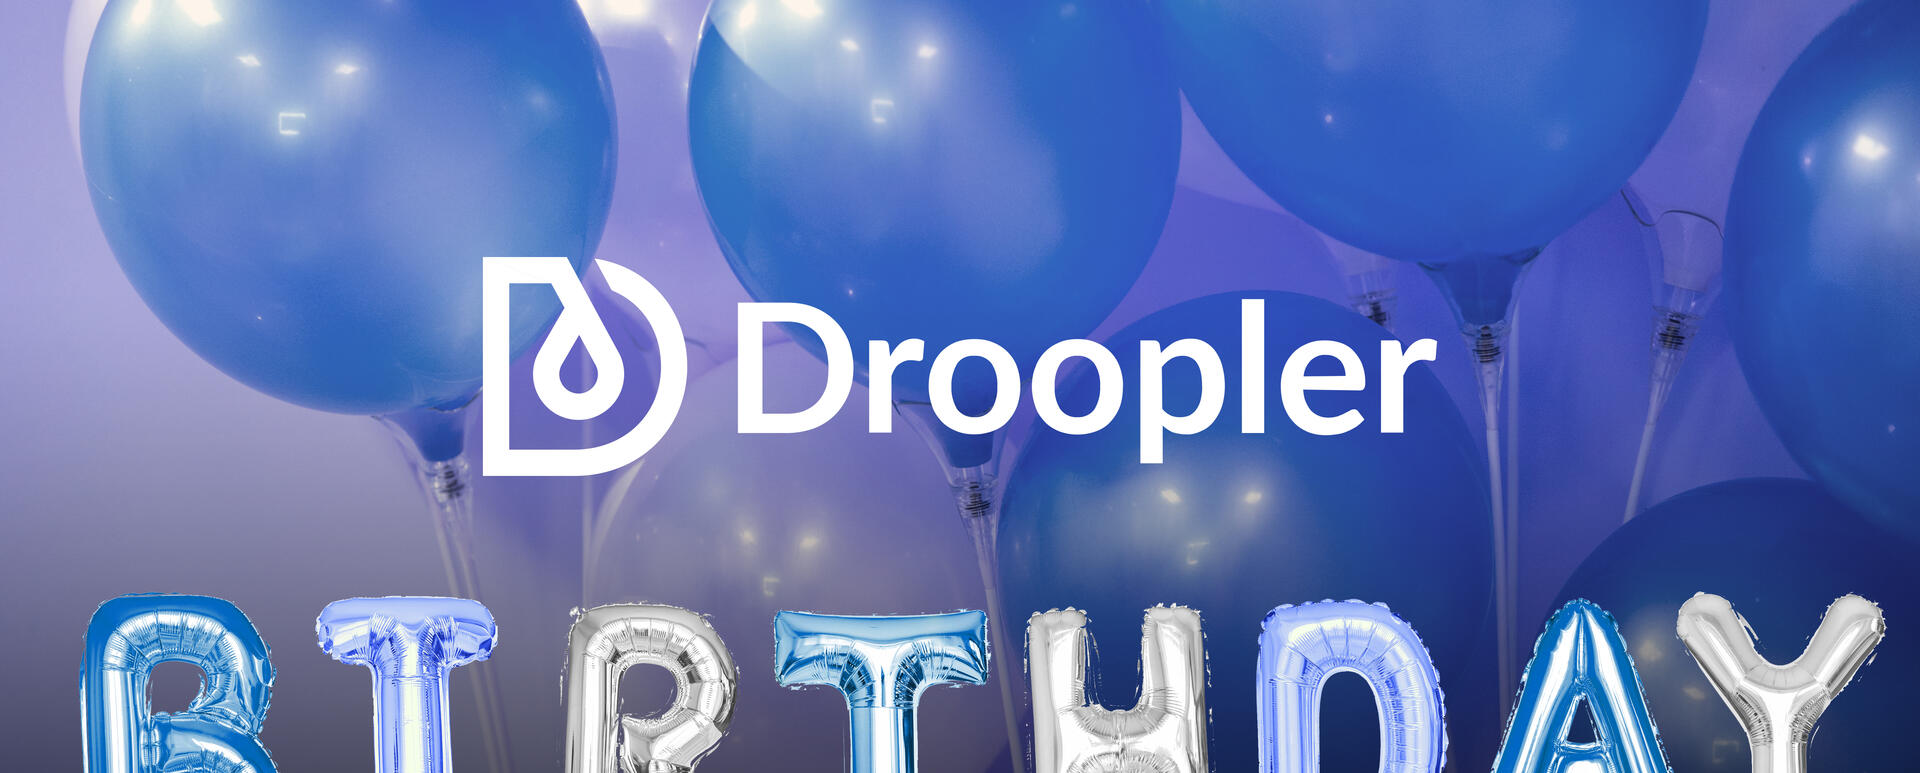 Droopler logo. Below, there are several hands holding baloons in shape of letters that are arranged to form a word "Birthday". Round, blue baloons are set as a background.